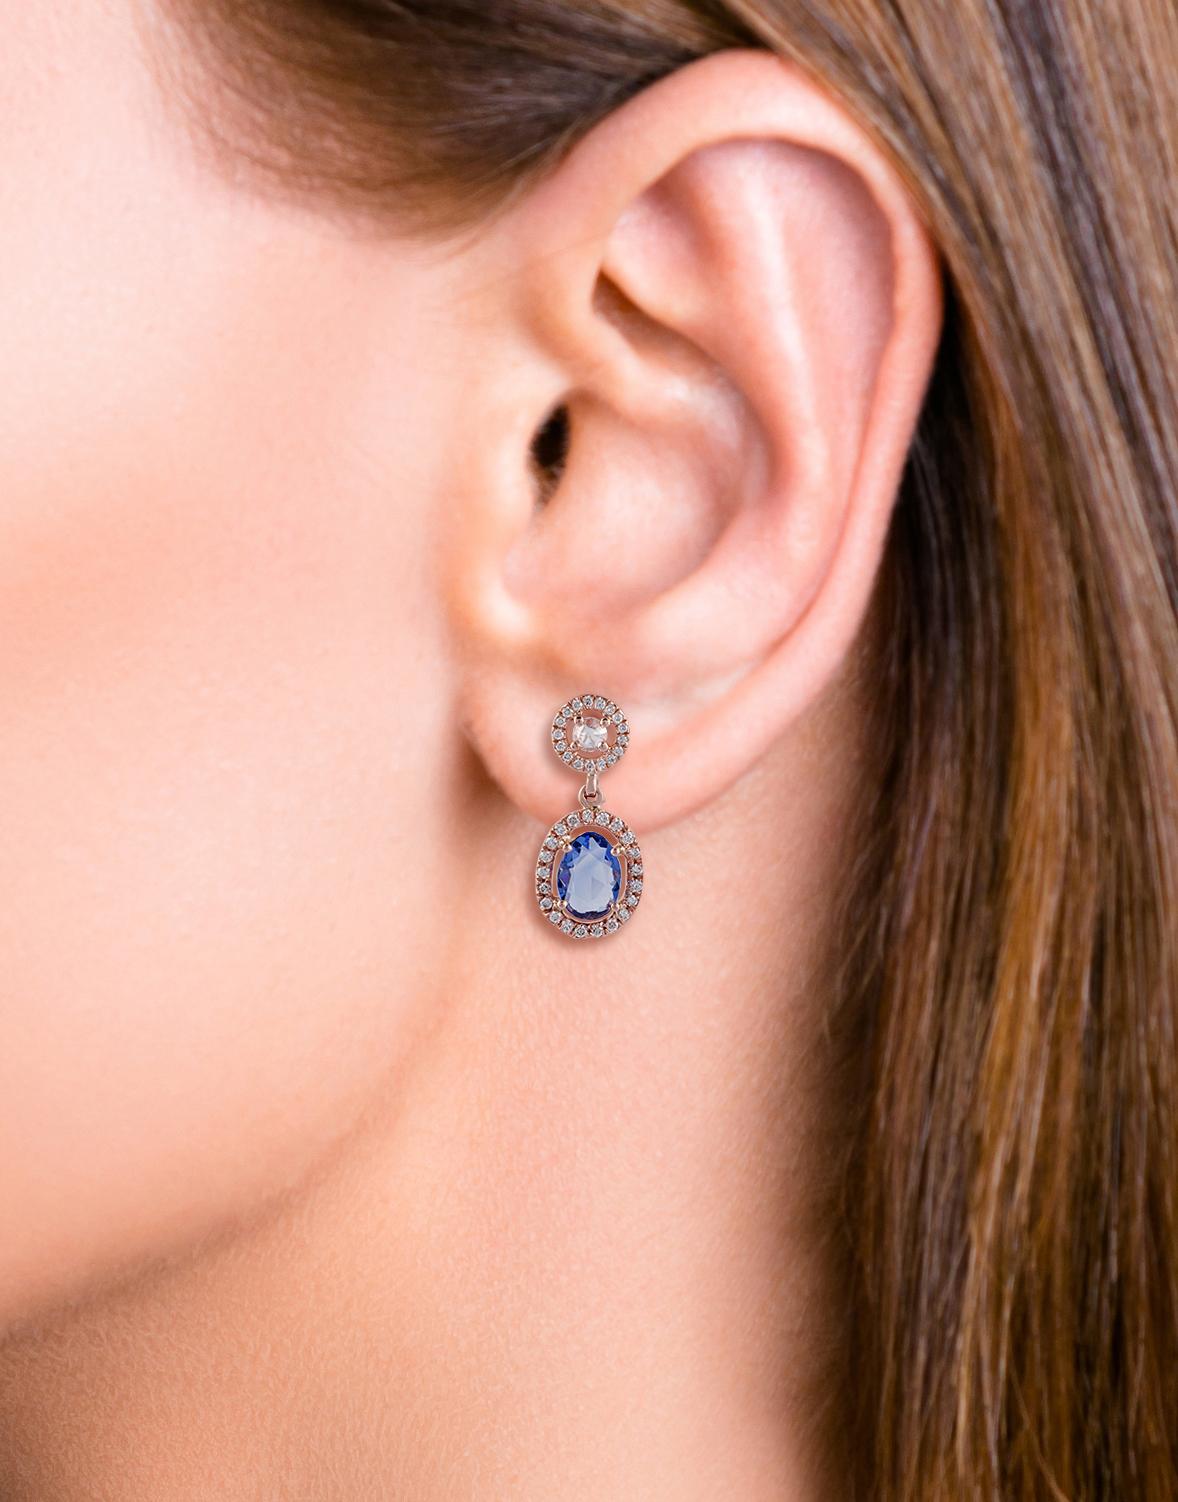 Contemporary 2.03 Carat Blue Sapphire and Diamond Earring Studded in 18 Karat Rose Gold